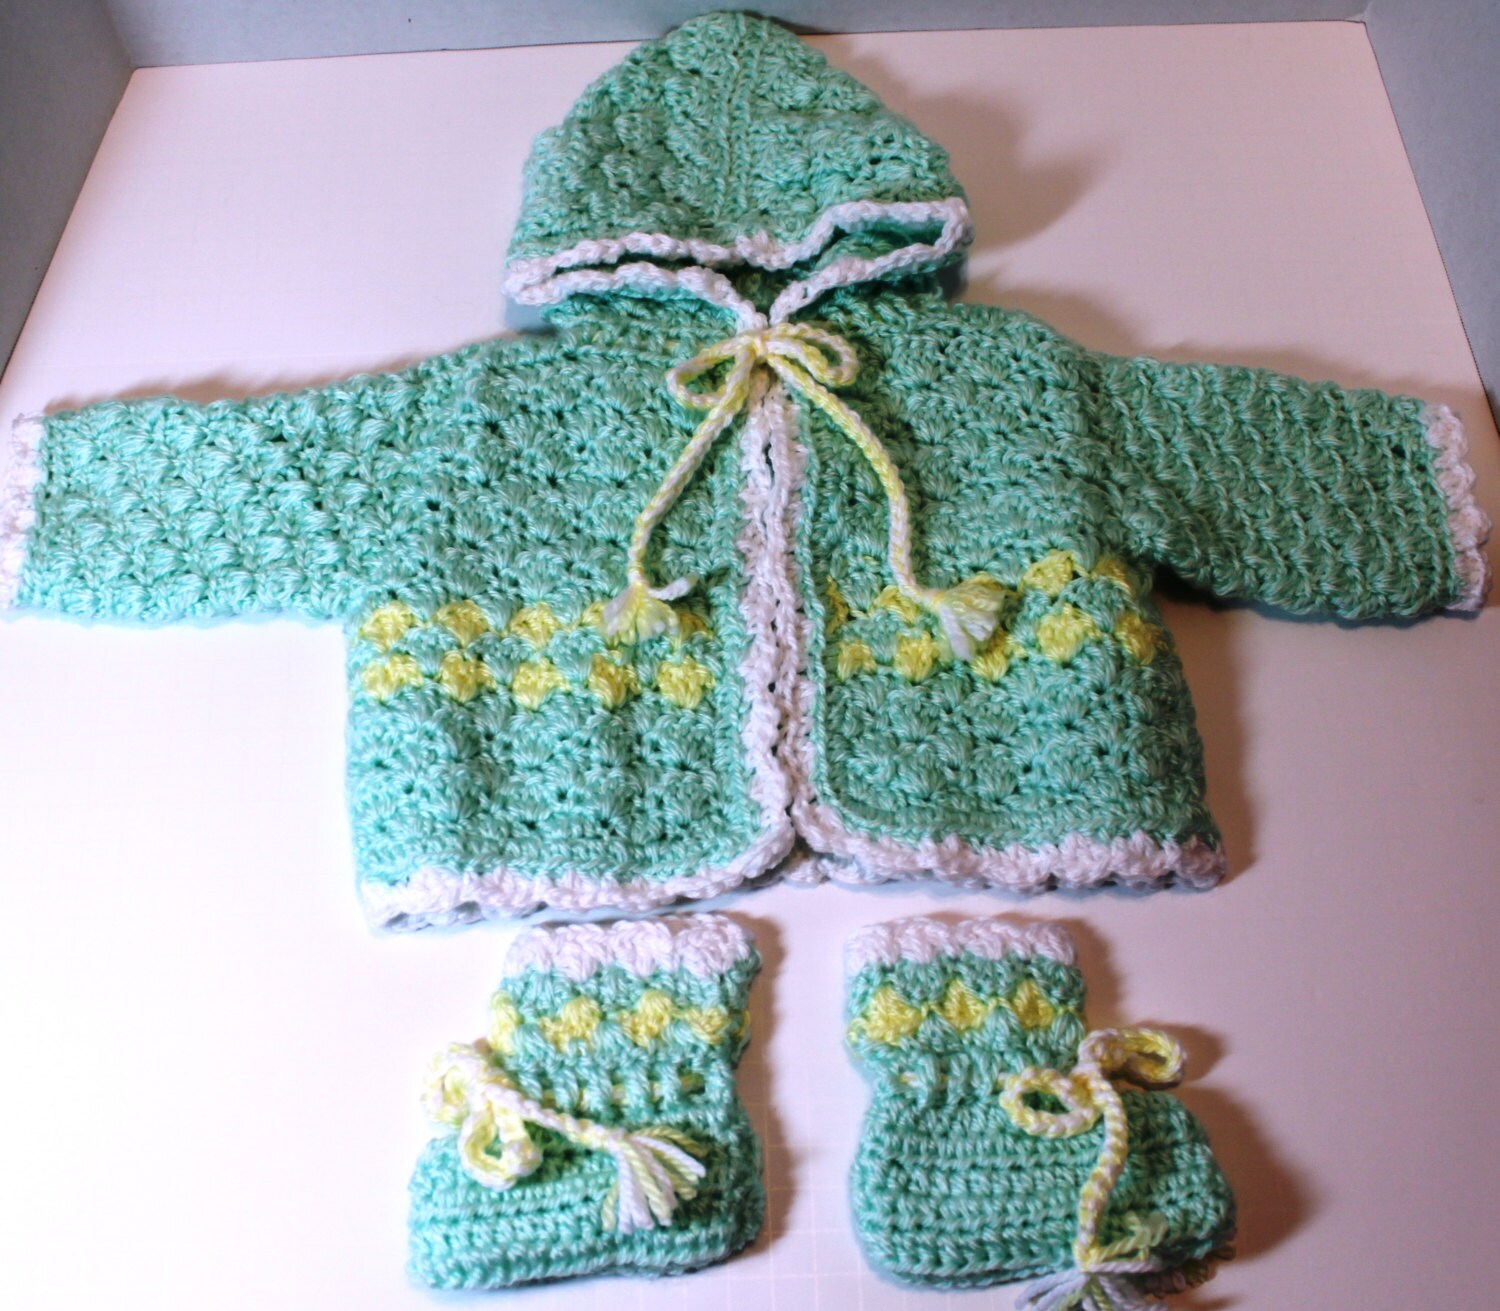 Crochet baby sweater with hood and matching by suelinder55 on Etsy